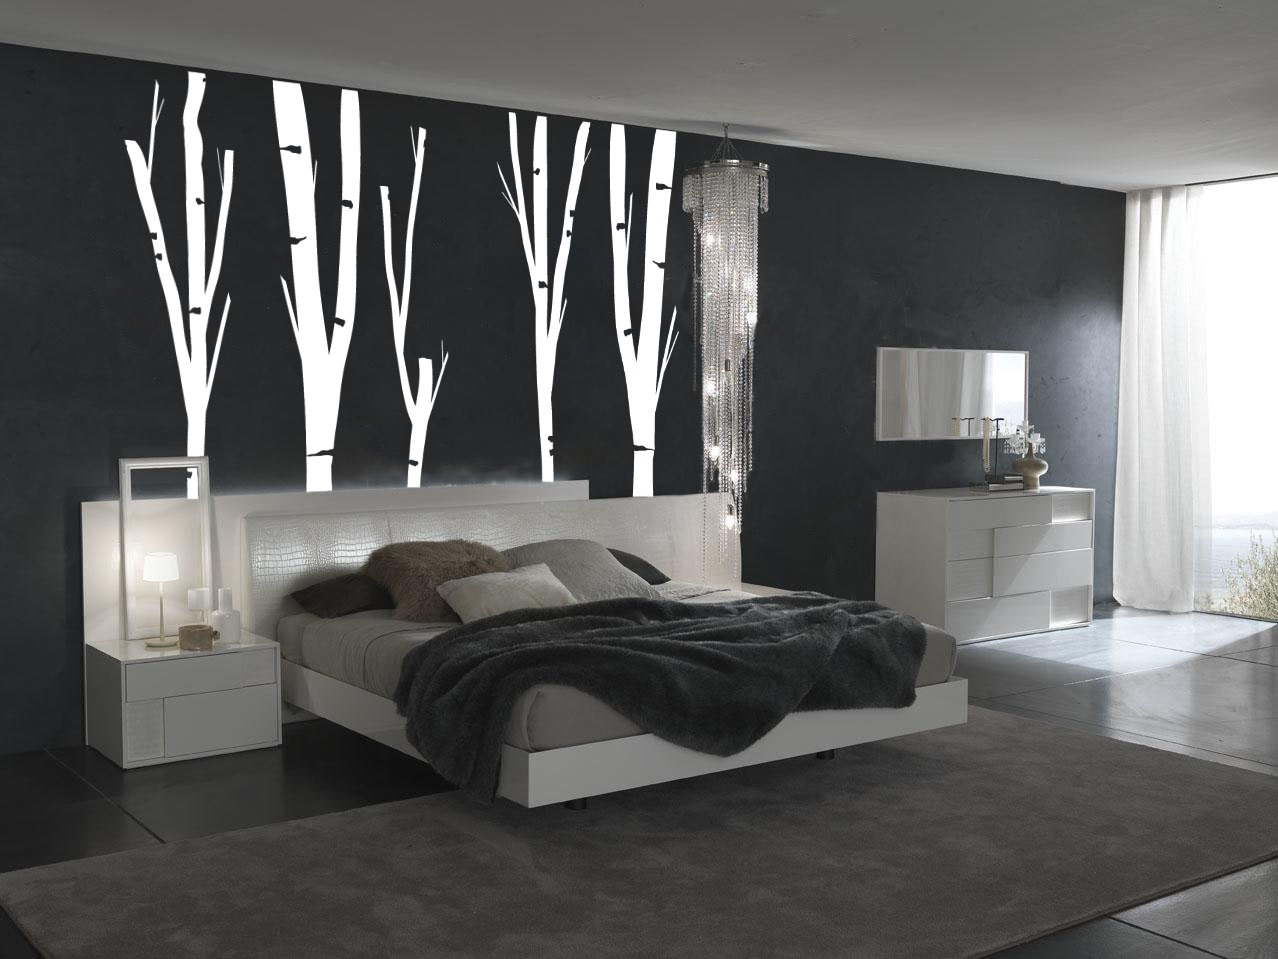 11 Great Light Emitting Wallpaper Examples Which Add Unique Style For Your Home